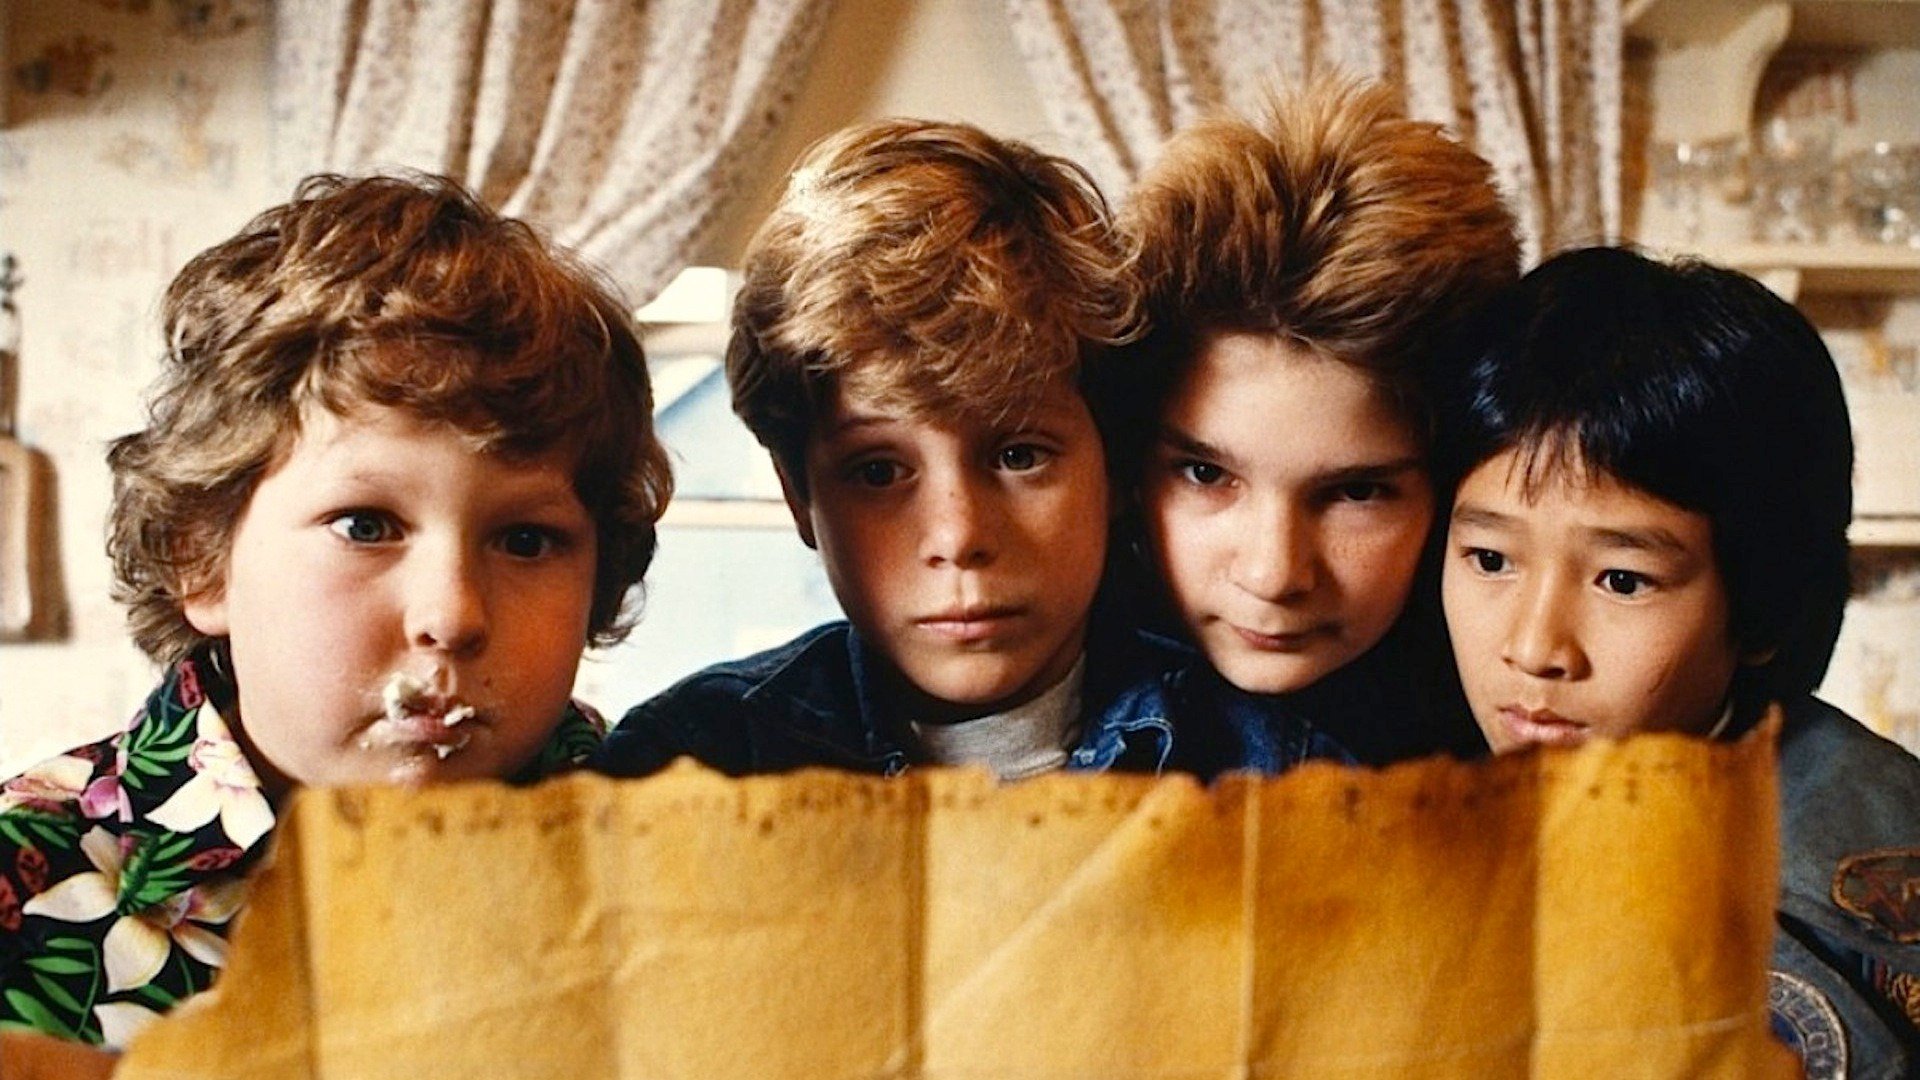 How Much Do You Remember About The Goonies? Goonies Trivia